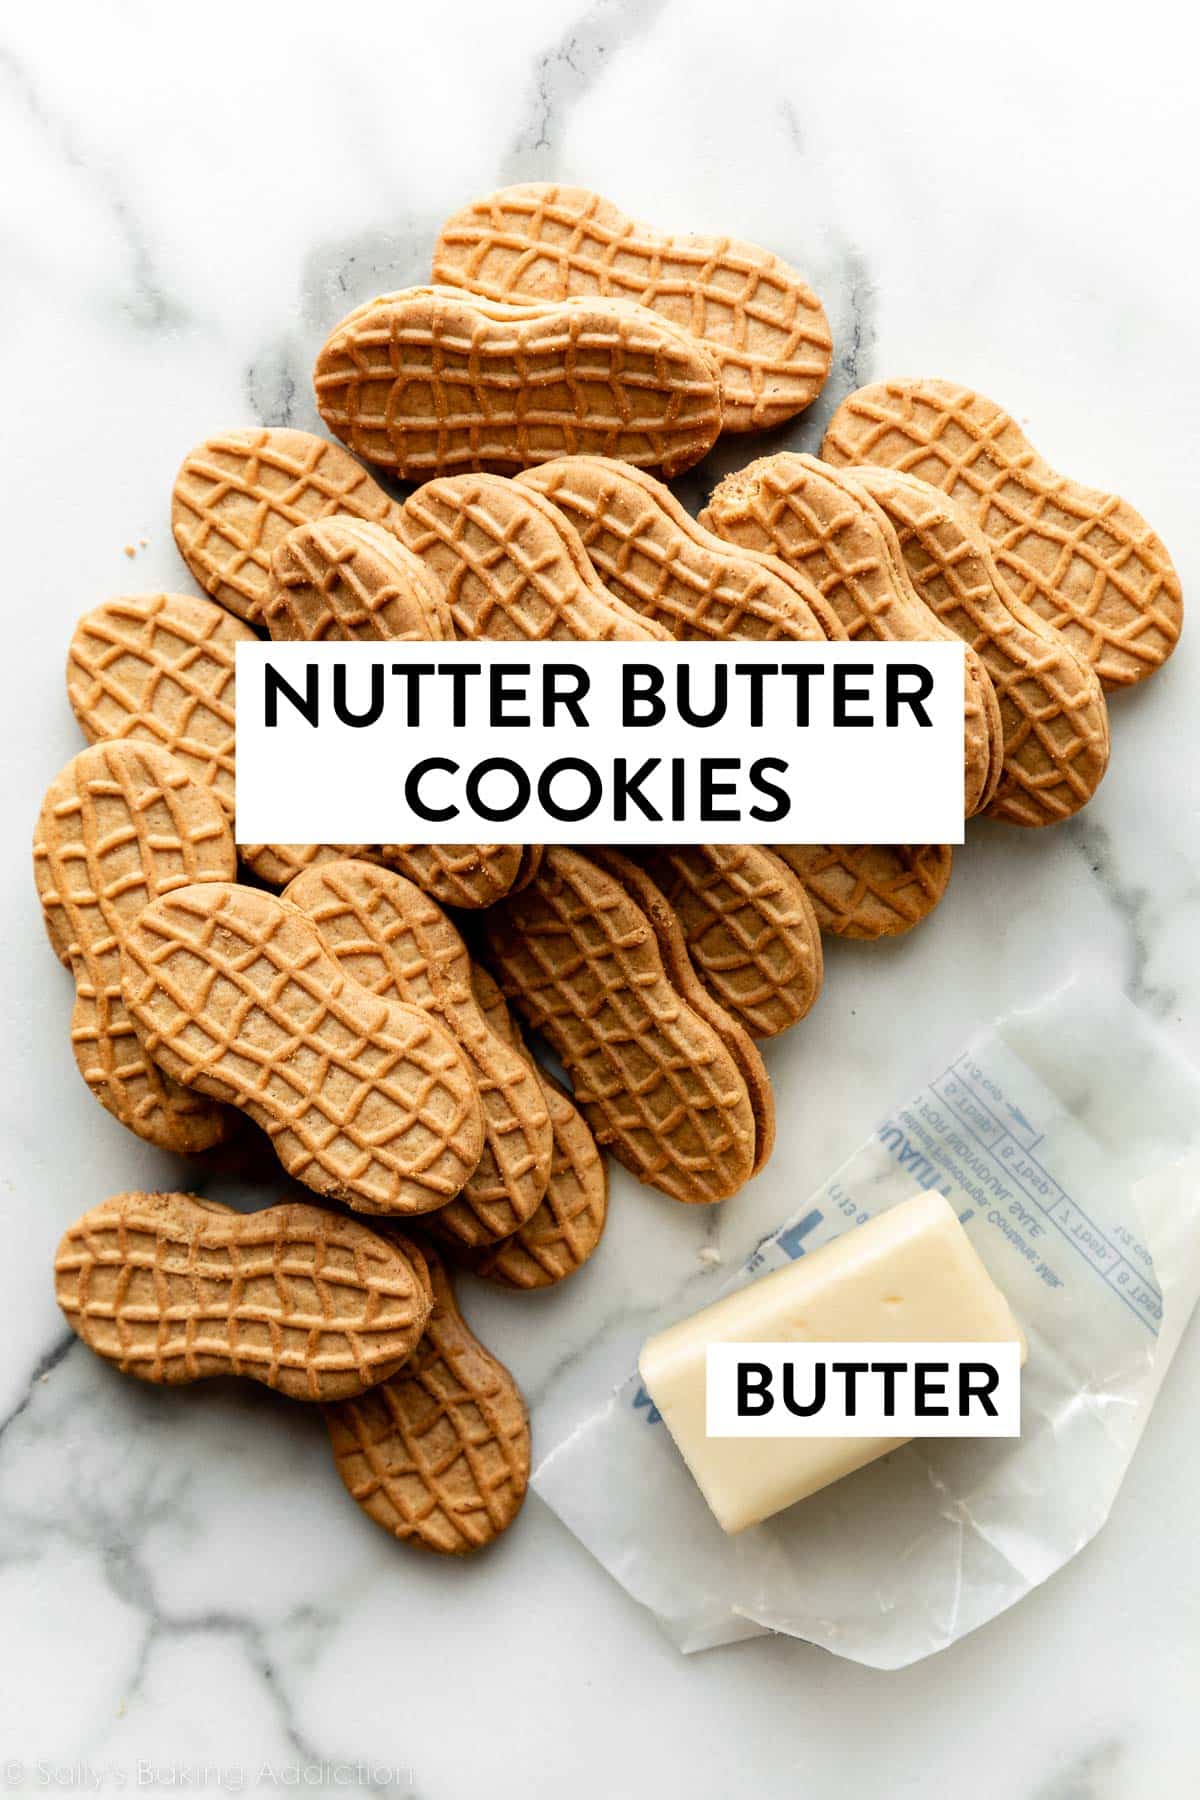 Nutter Butter sandwich cookies and butter on marble counter.